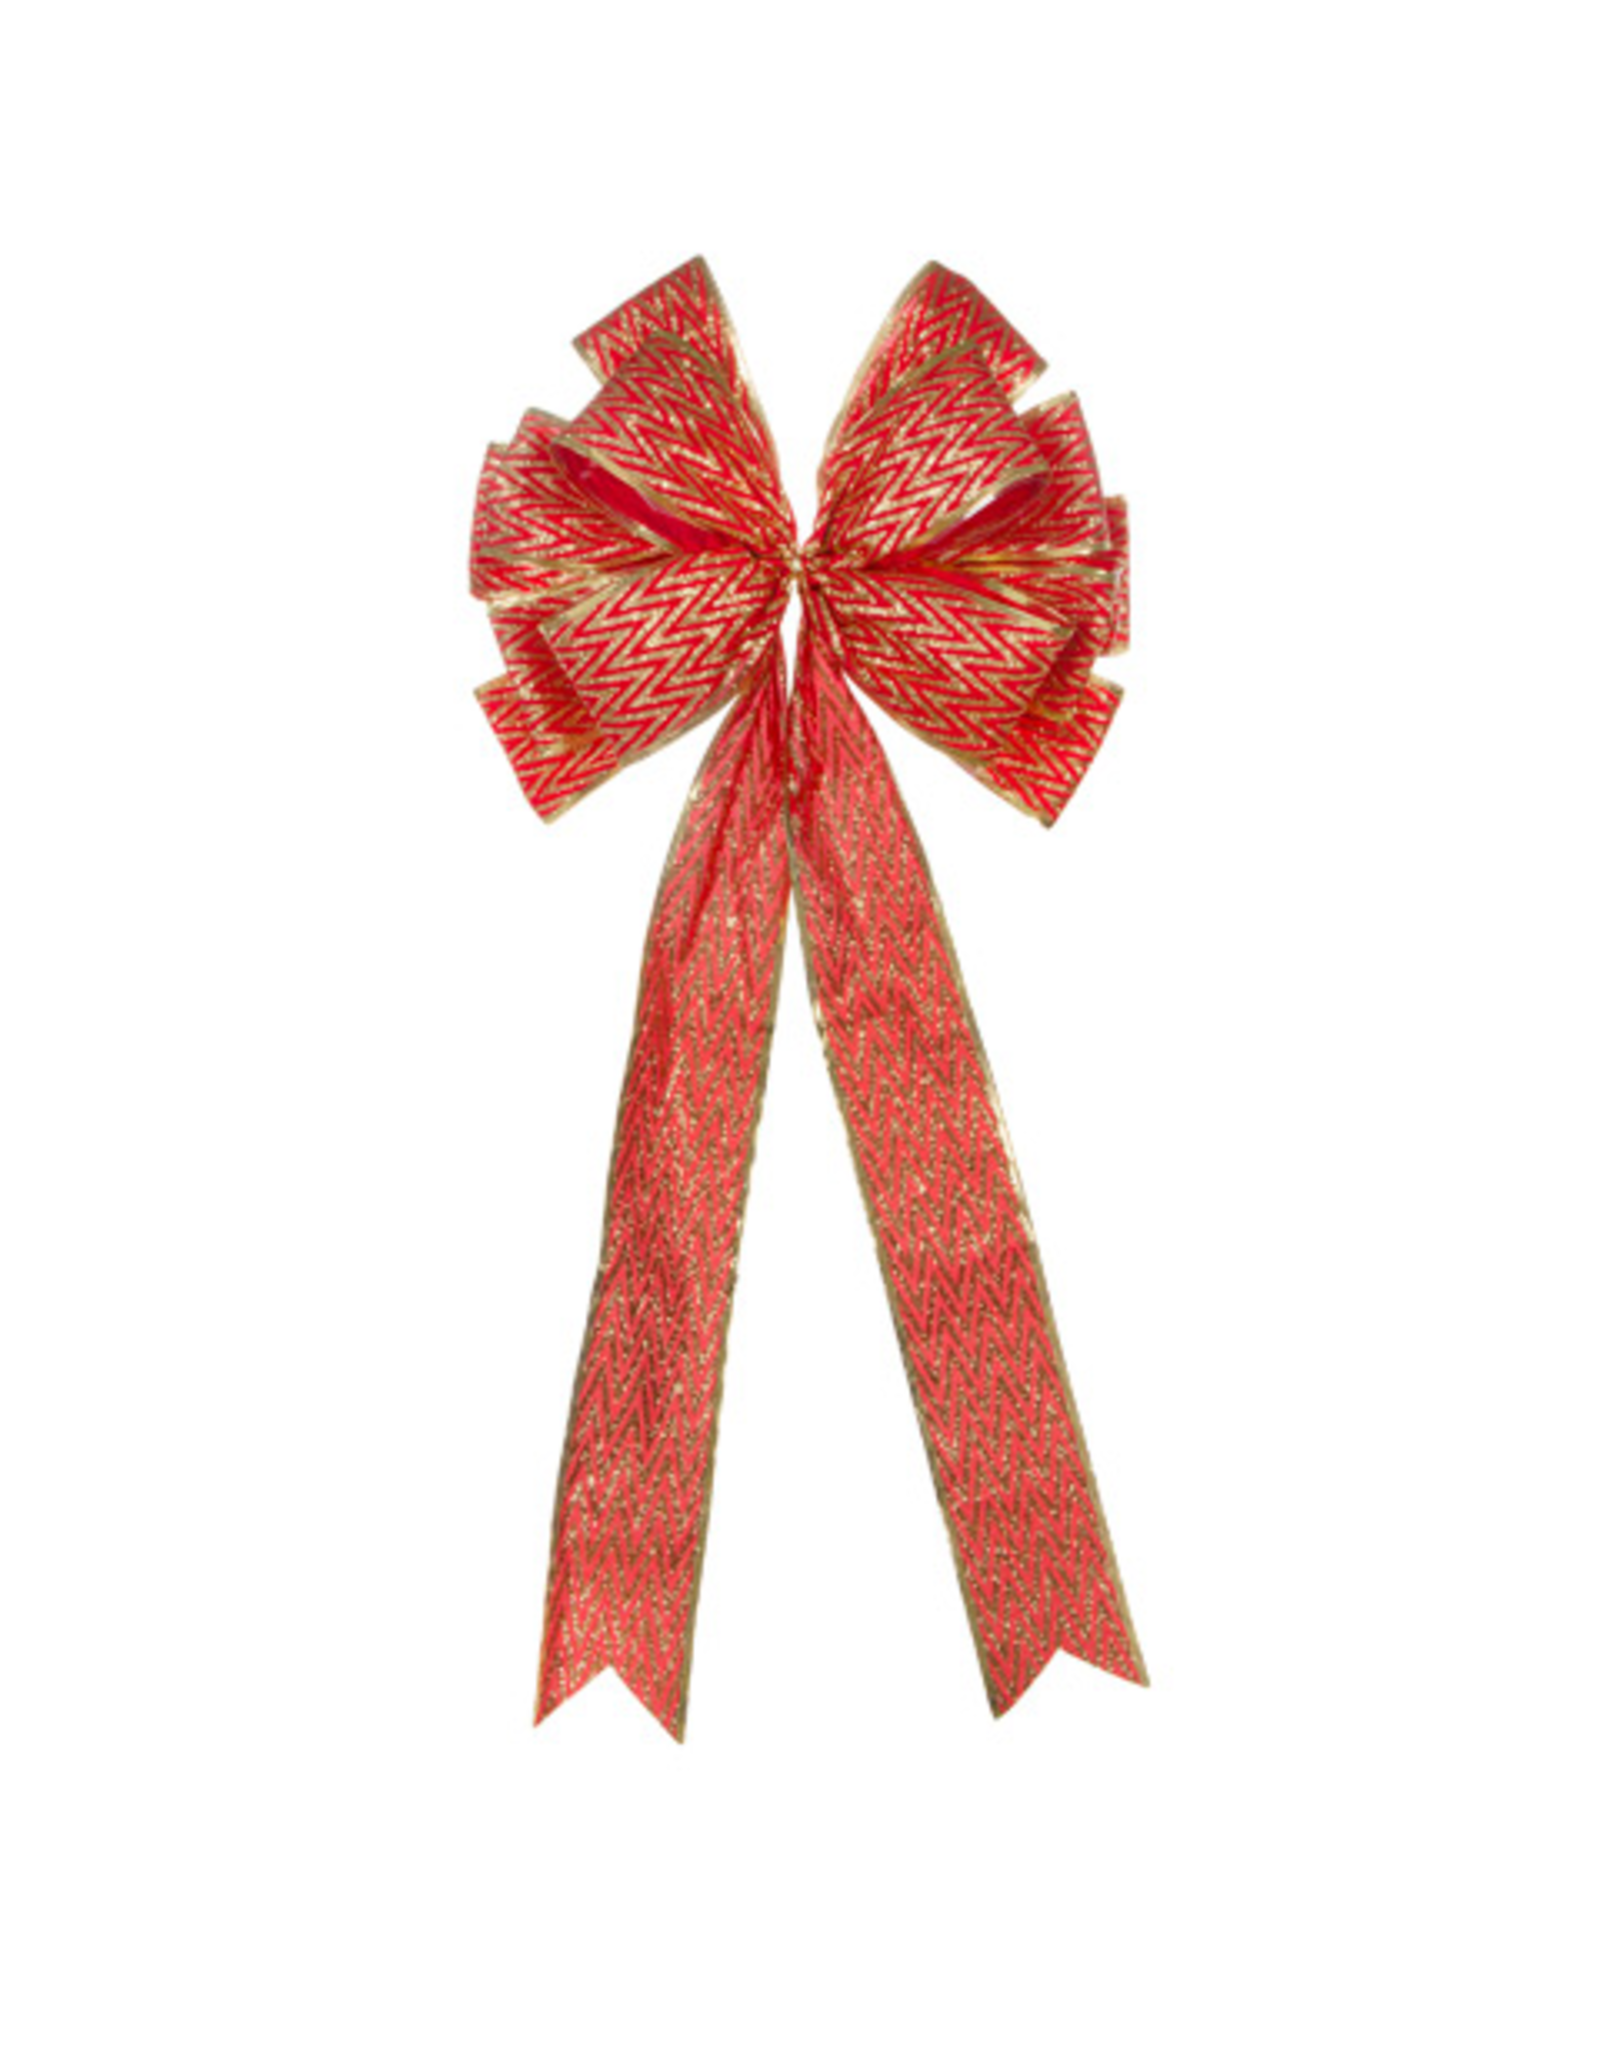 Darice Christmas Gold Red Chevron Bow - Tree Topper 11x22 inch